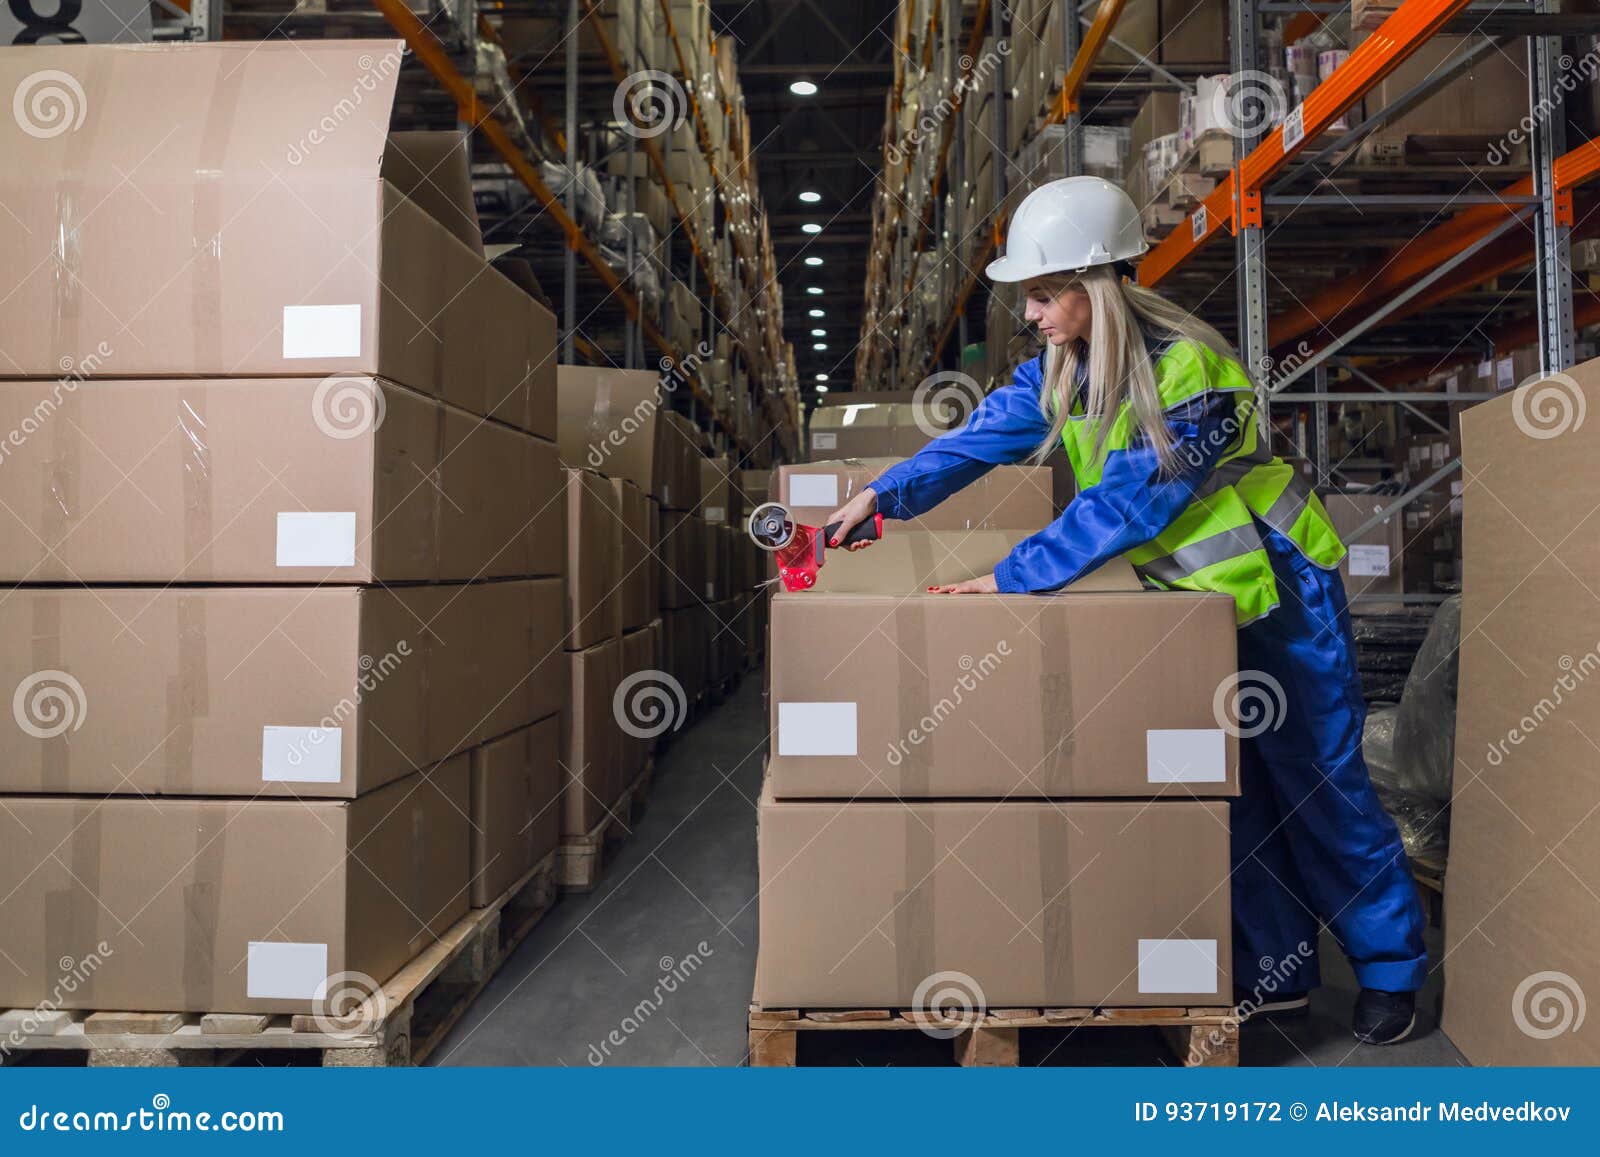 warehouse worker packing boxes in storehouse